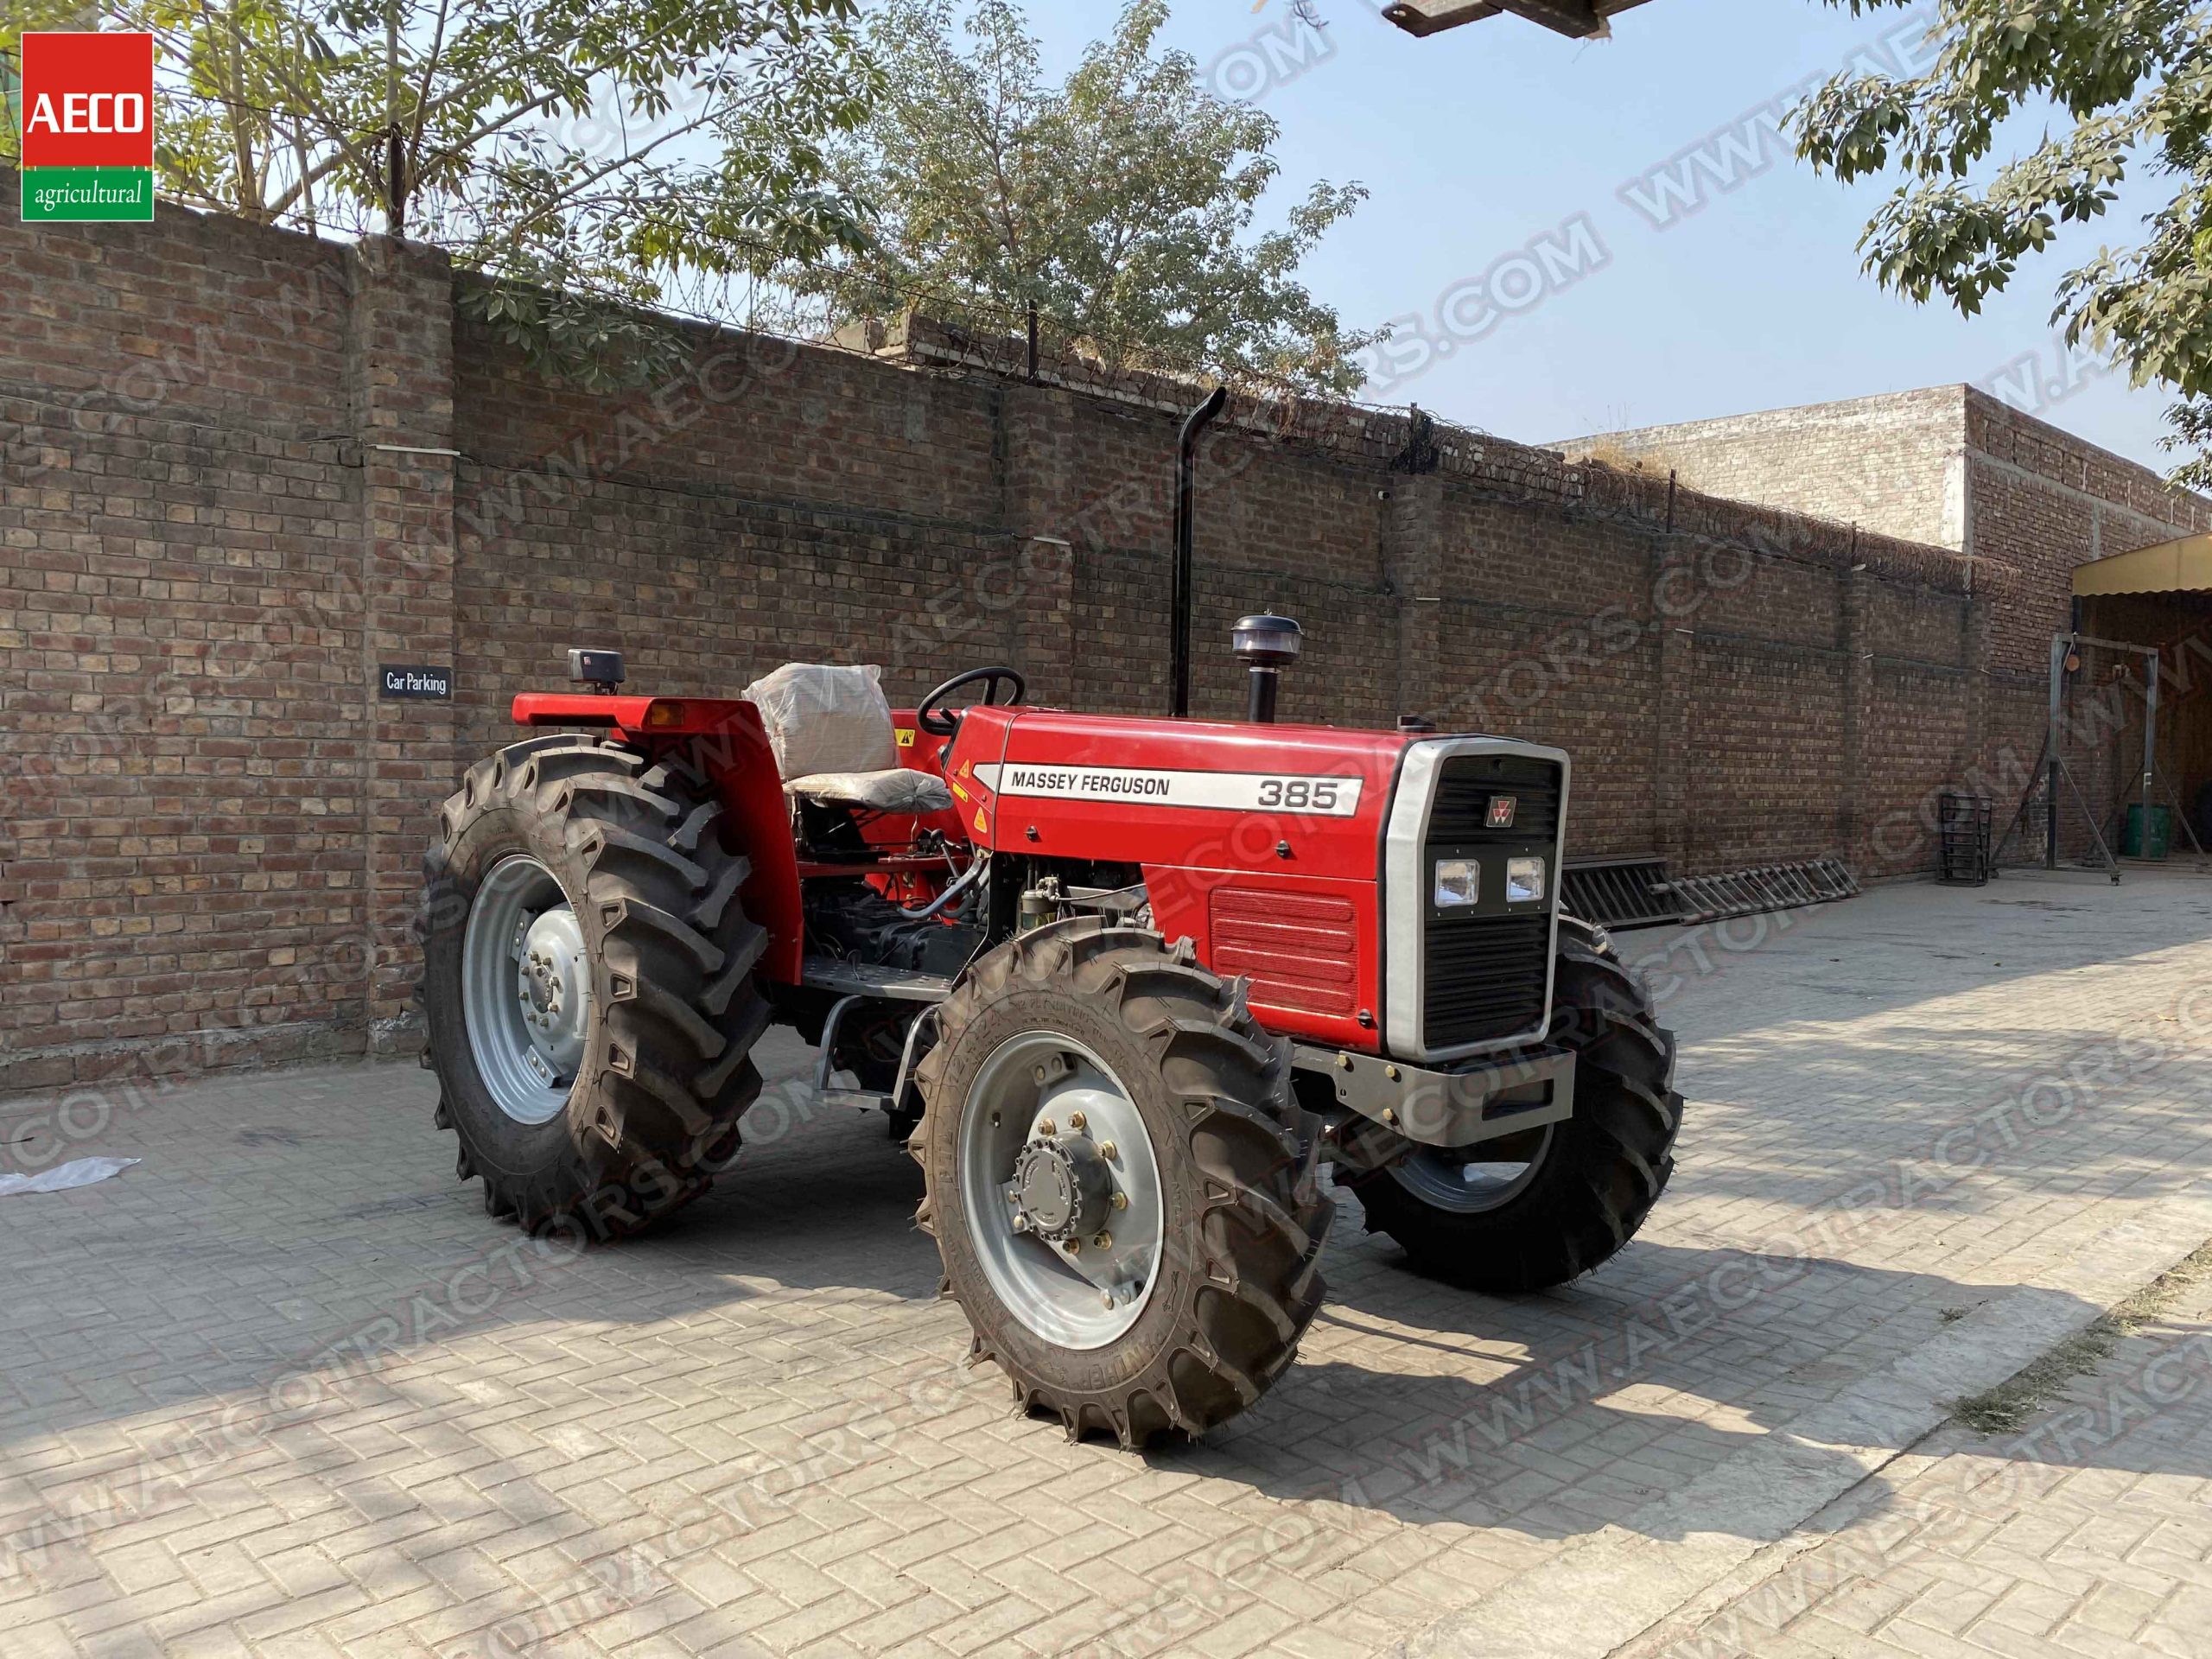 massey-ferguson-385-4wd-tractor-for-sale-mf-385-4wd-price